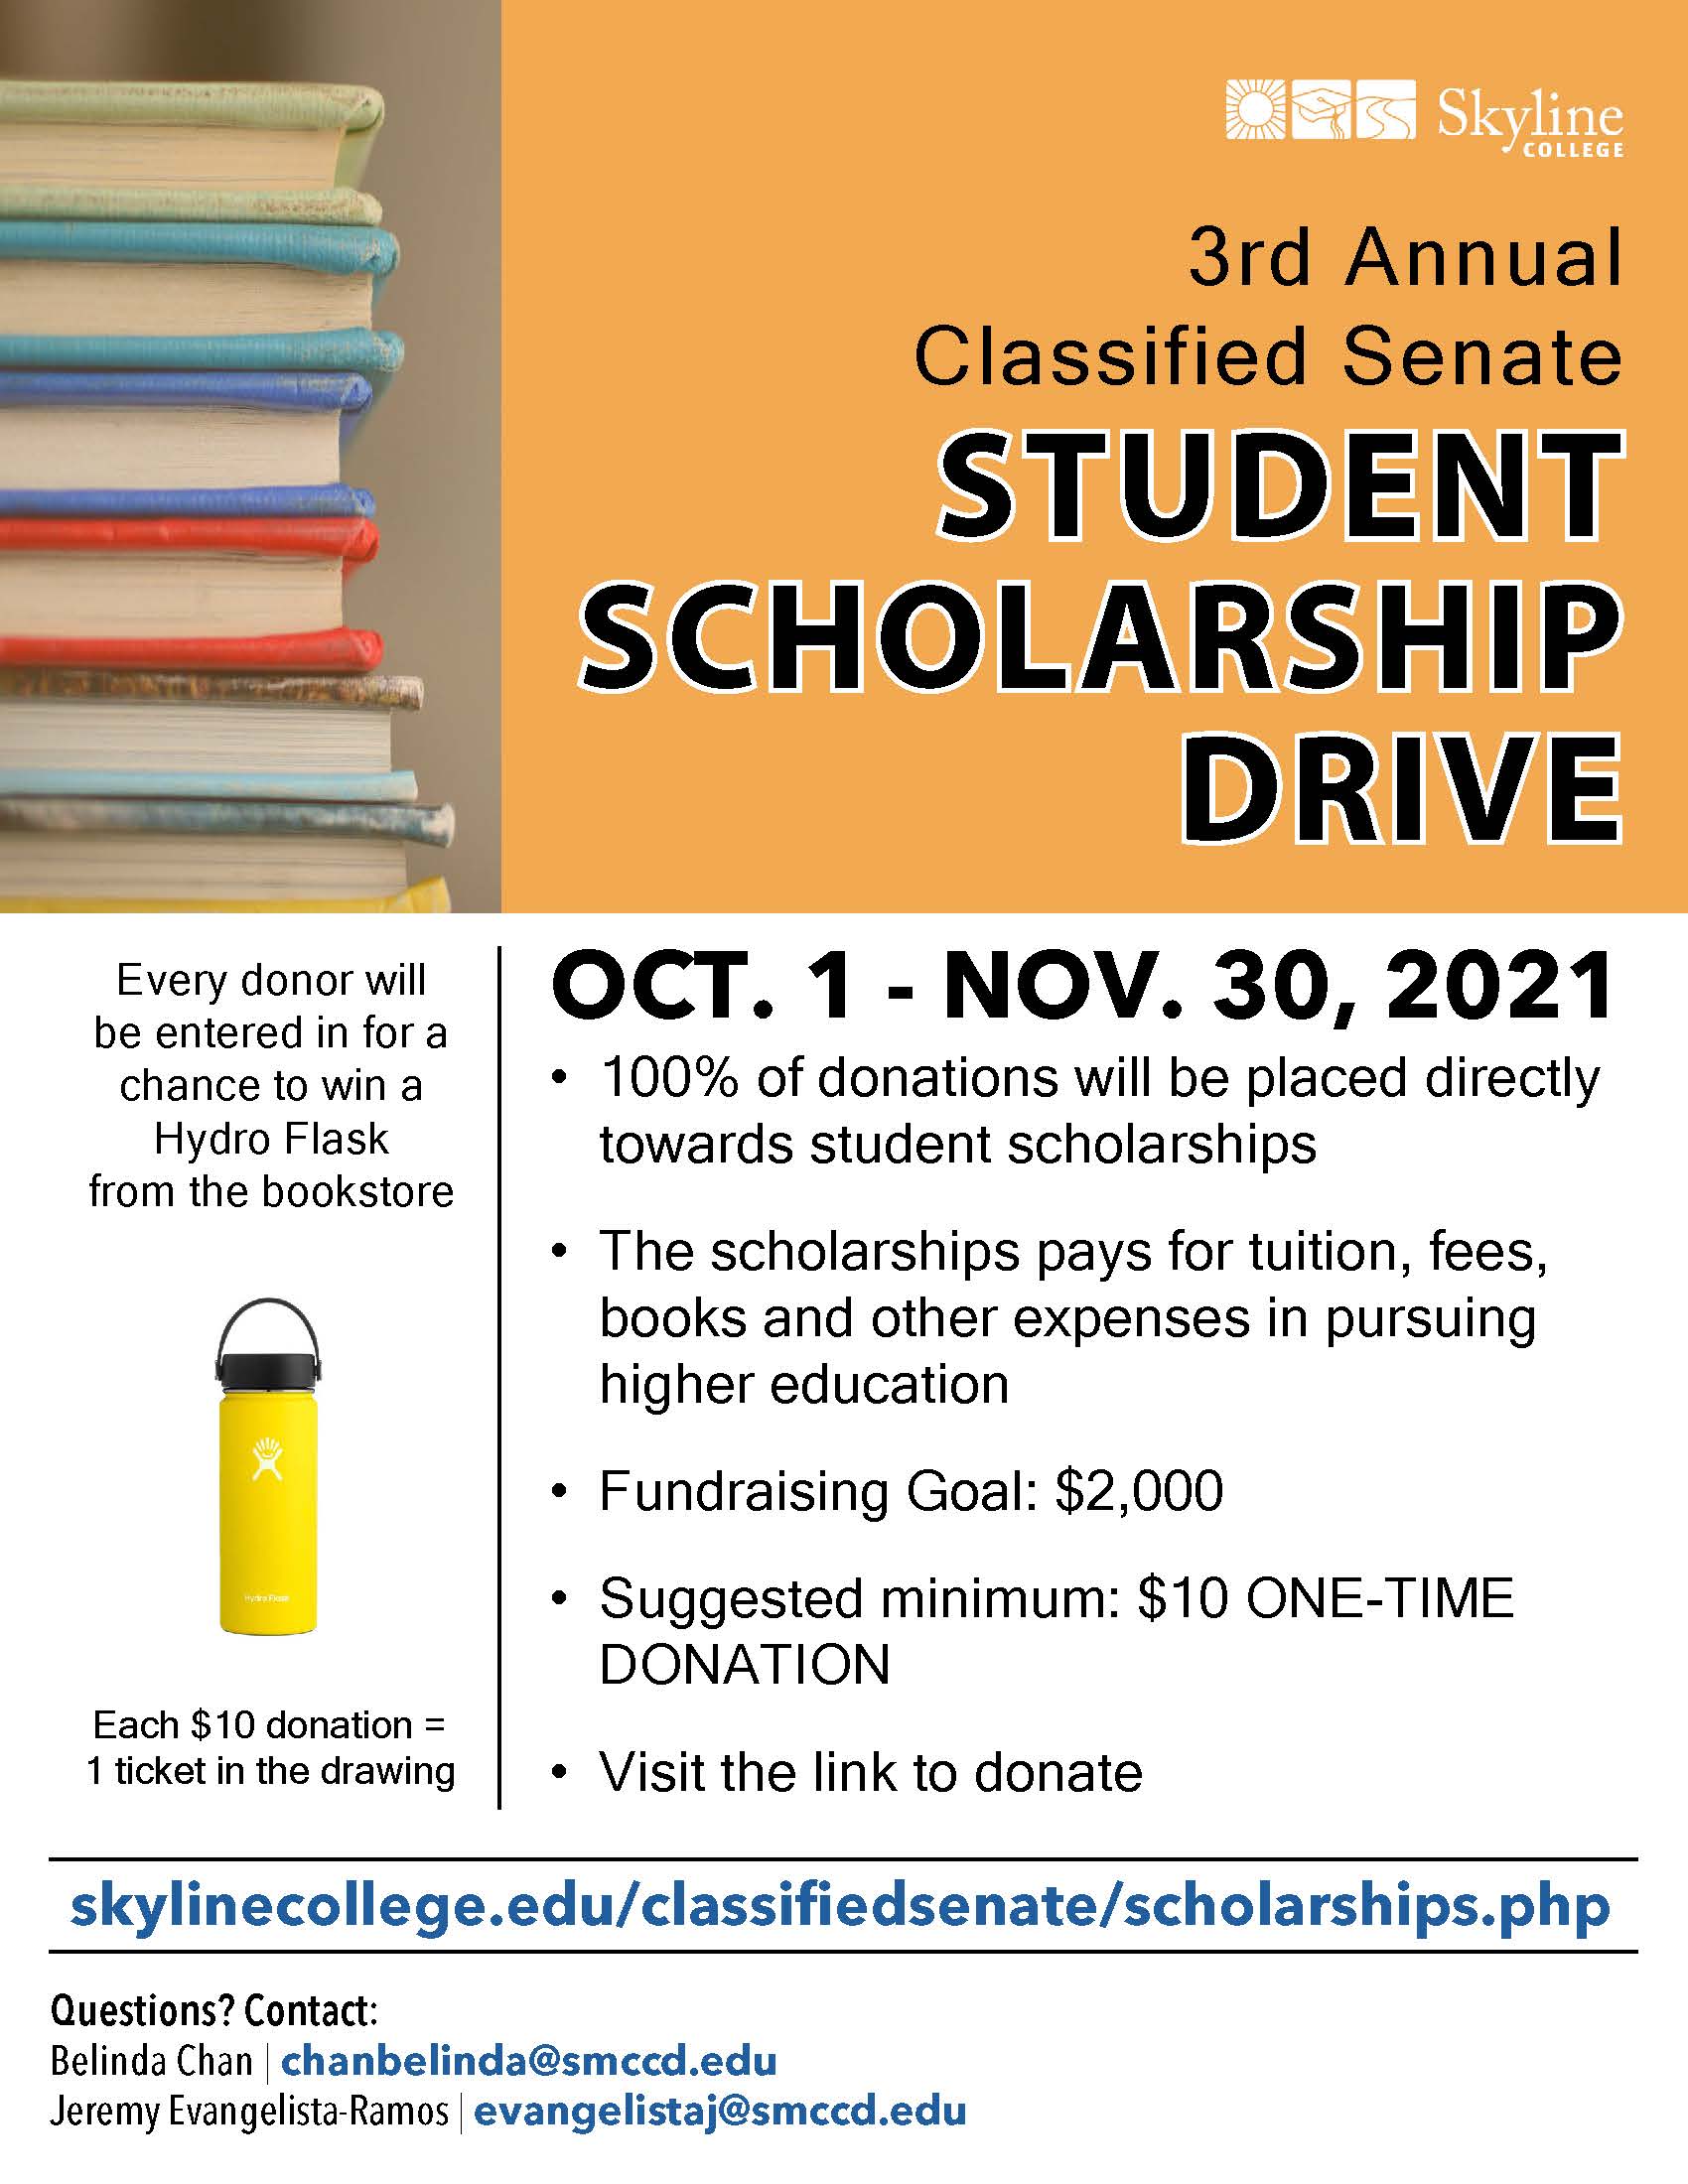 Classified Senate Student Scholarships Drive Flyer: information described on page